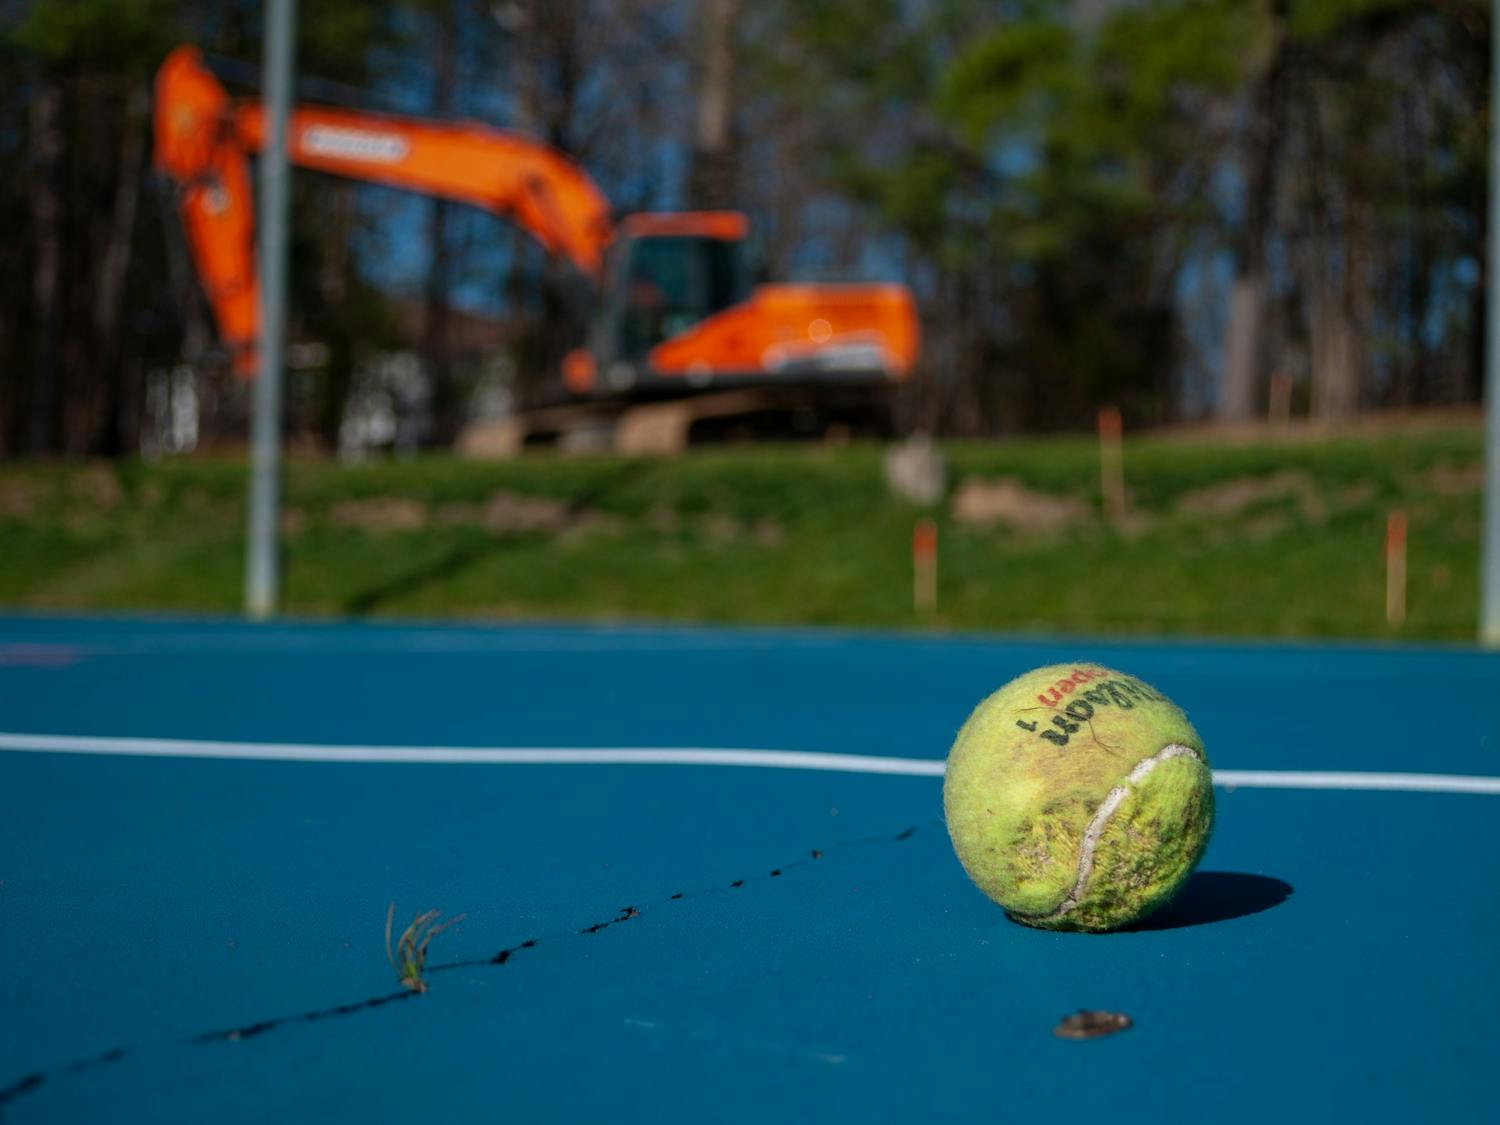 Construction pauses on the Cone-Kenfield Tennis Center in Chapel Hill on Monday, Mar. 21, 2022.